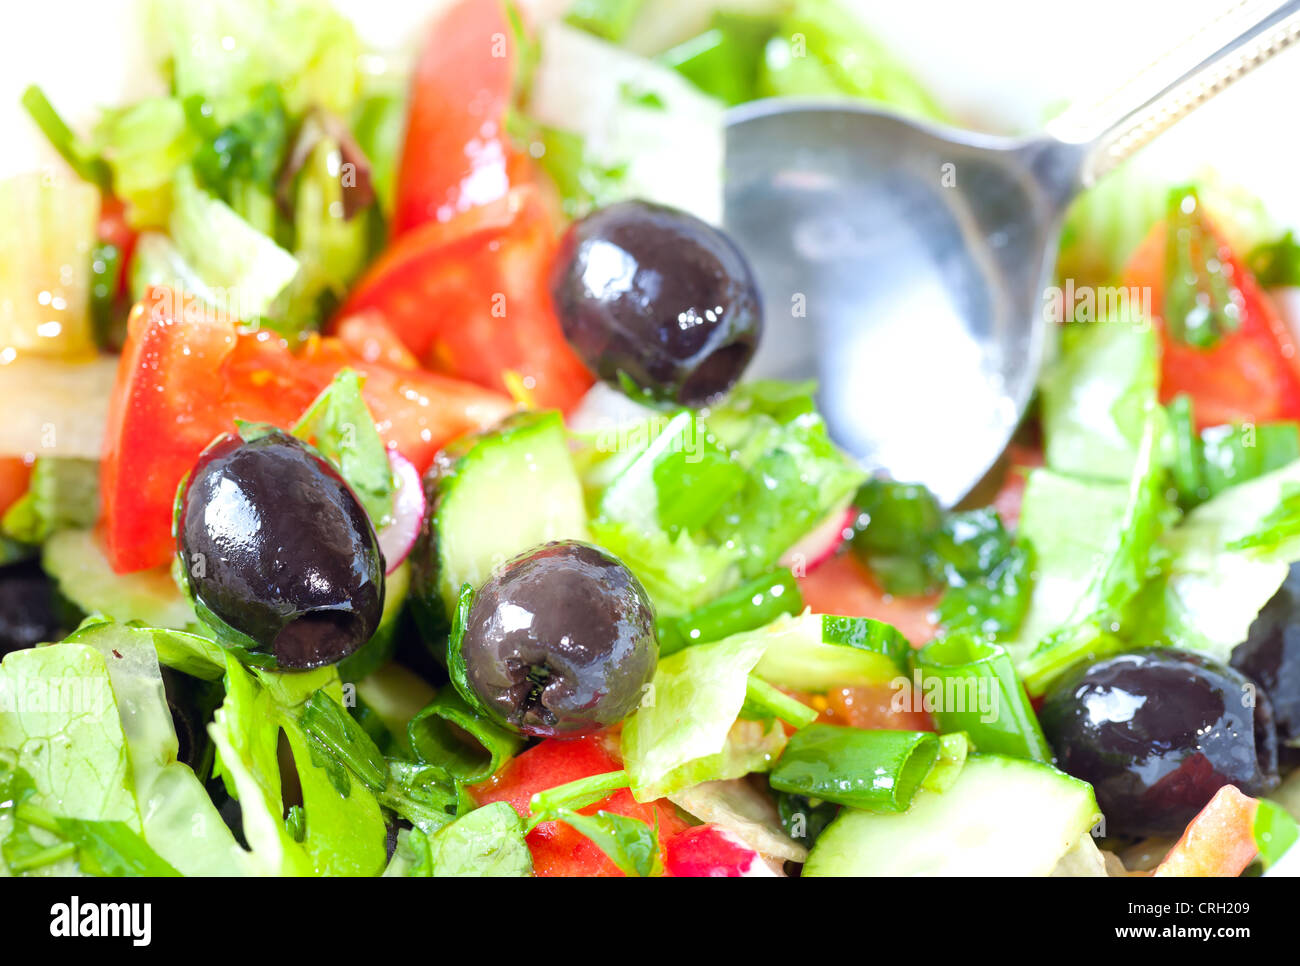 Closeup photo of fresh side dish with salad, tomatoes, olives, cucumbers and a metal spoon Stock Photo